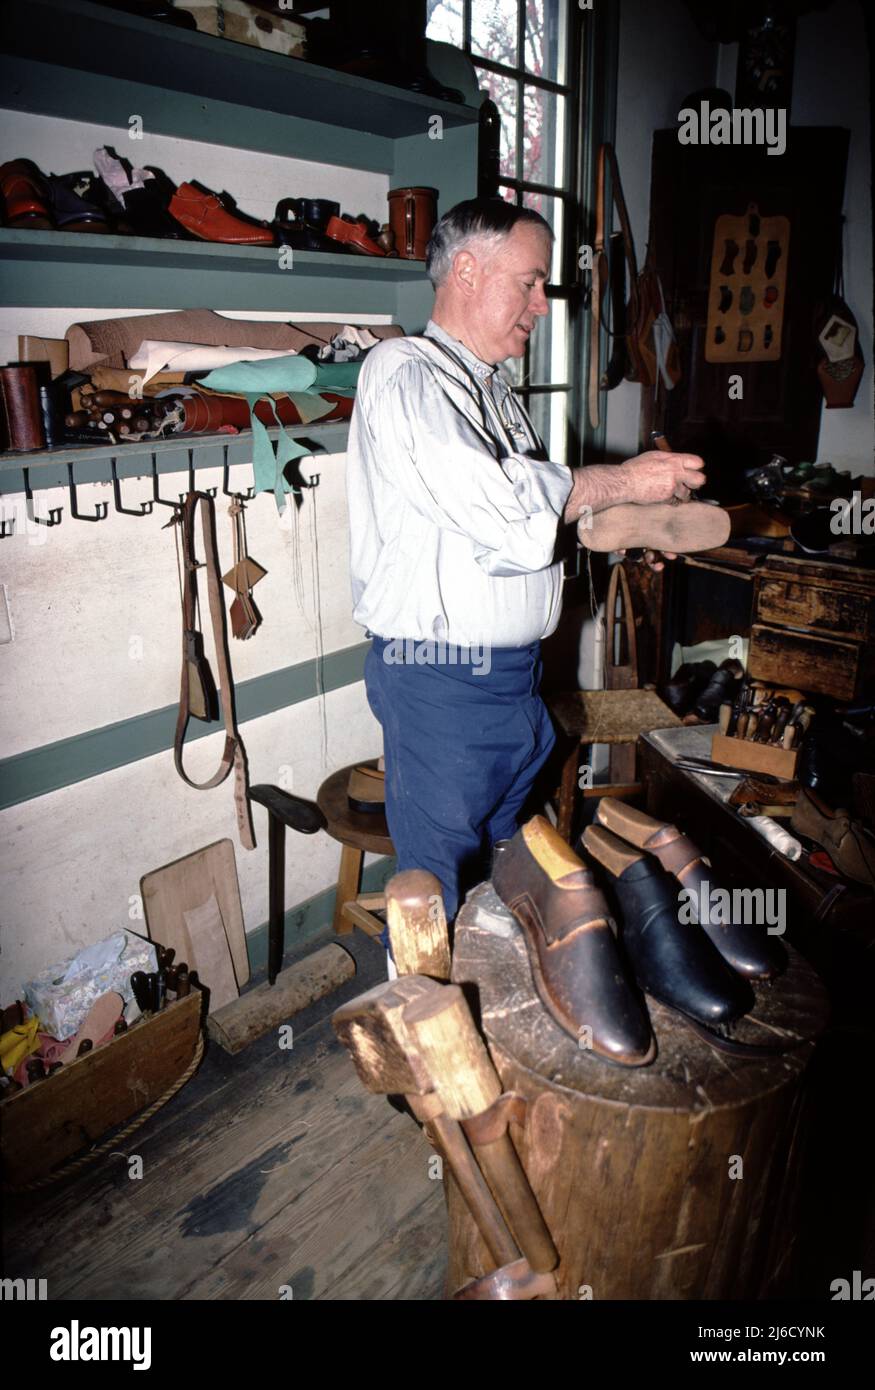 Williamsburg, CA. U.S.A. 9/1987. Cordwainer was the title given to shoemakers.  Cobblers were those who repaired shoes.  The cobbler had as much as five years less training than a cordwainer.  In most countries, including the American colonies, cobblers were prohibited by proclamation from making shoes.  The first shoemakers, tanners and other tradesmen arrived in Jamestown in 1607; among the colony’s principal founder John Smith’s many talents, was that of shoemaker –  the settlement was partially funded by a thriving English shoe trade. Stock Photo